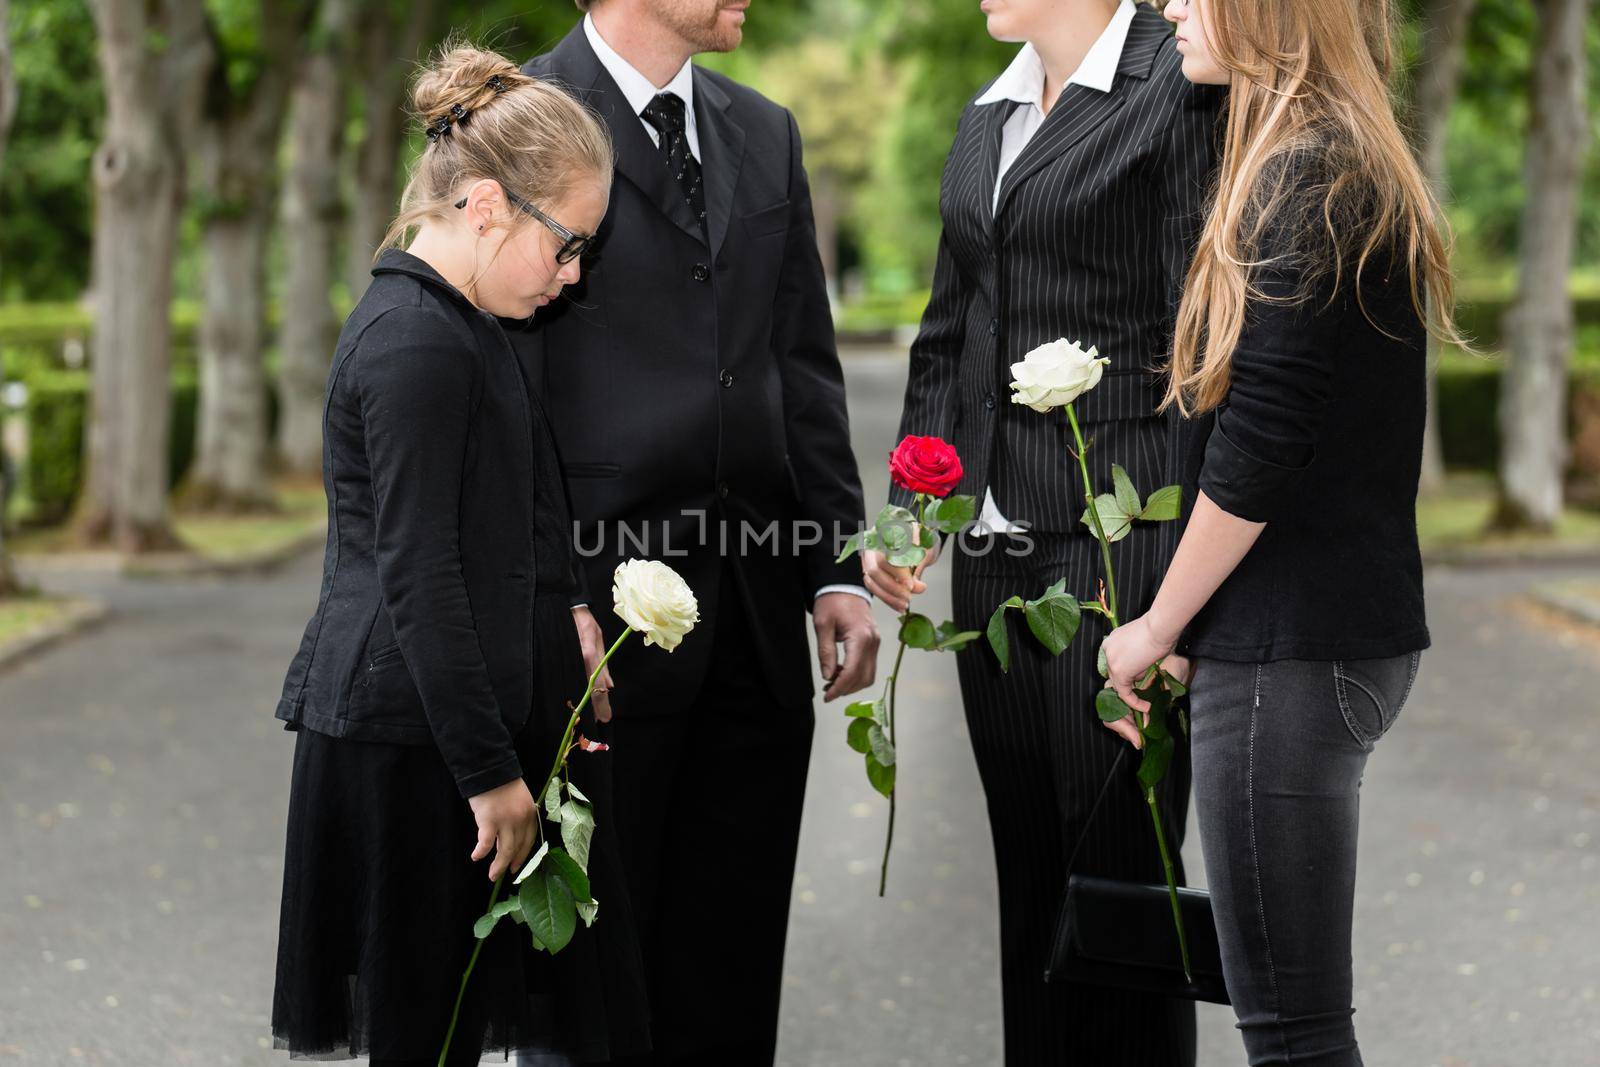 Family mourning on funeral at cemetery standing in group with flowers